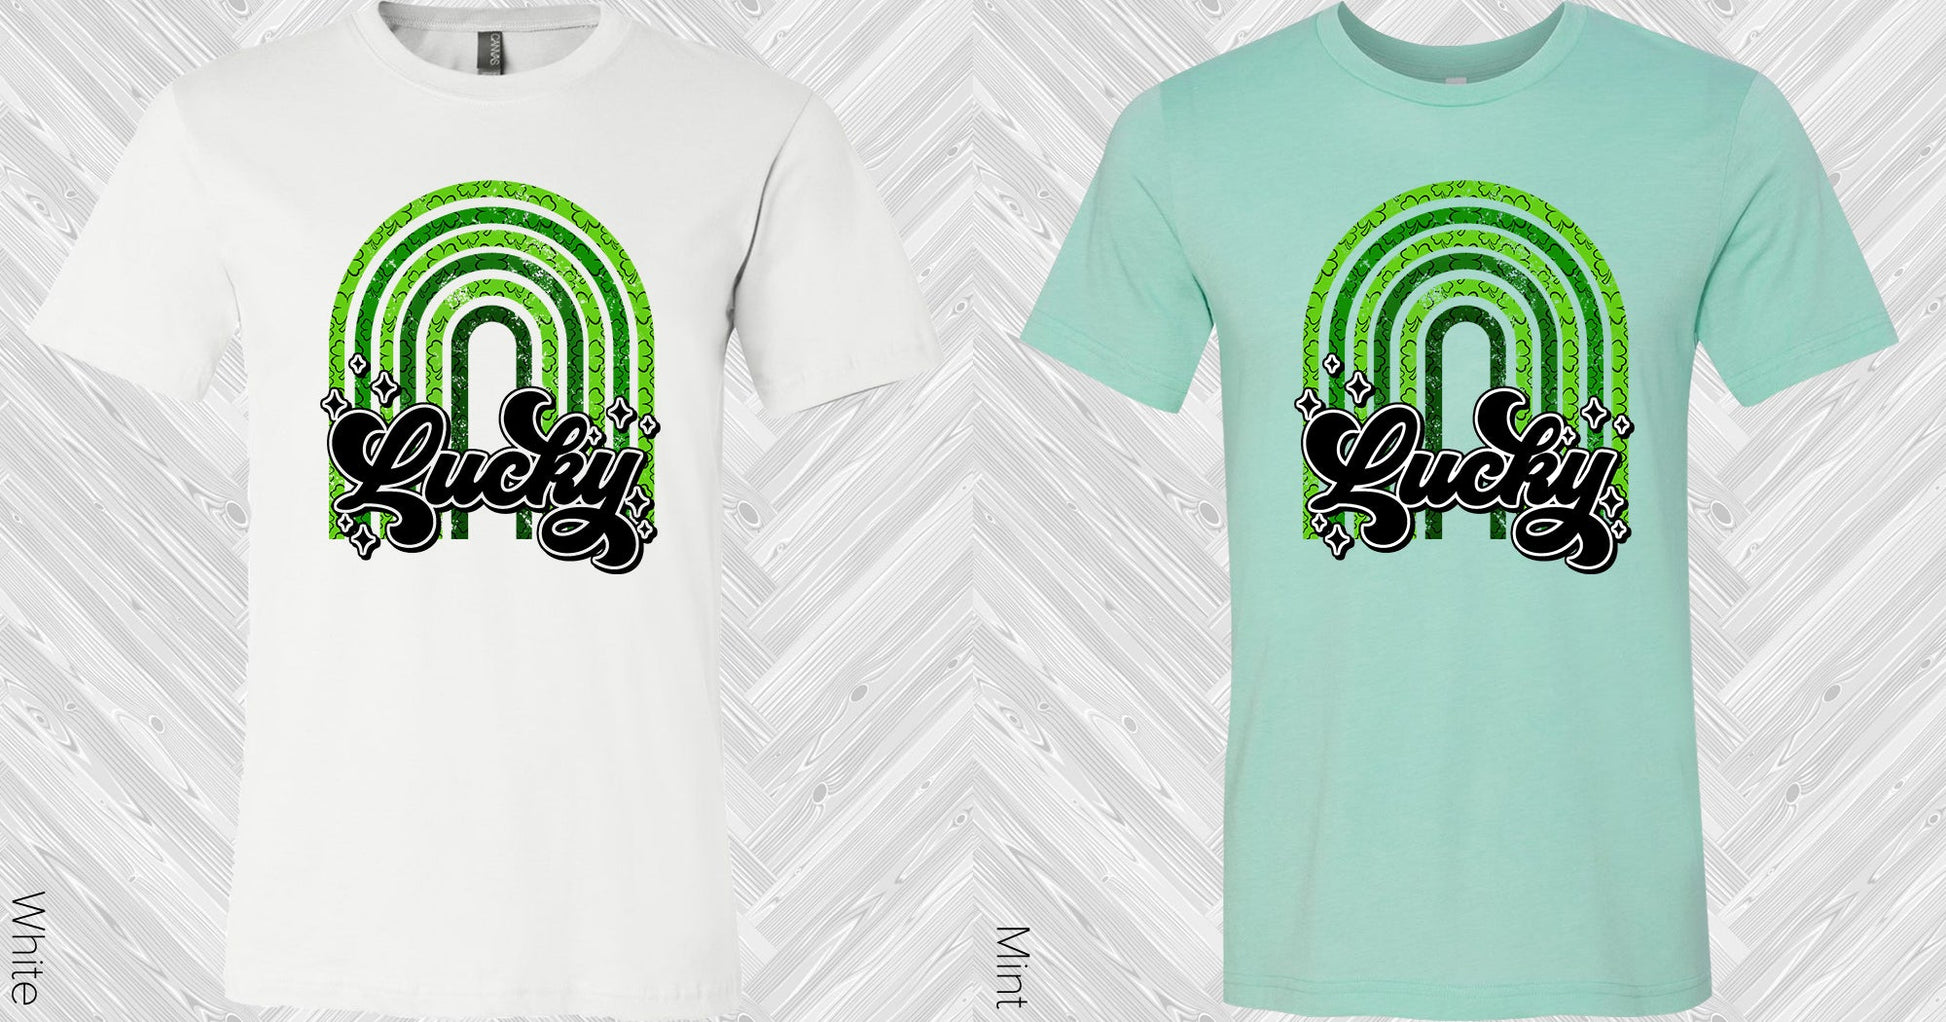 Lucky Graphic Tee Graphic Tee